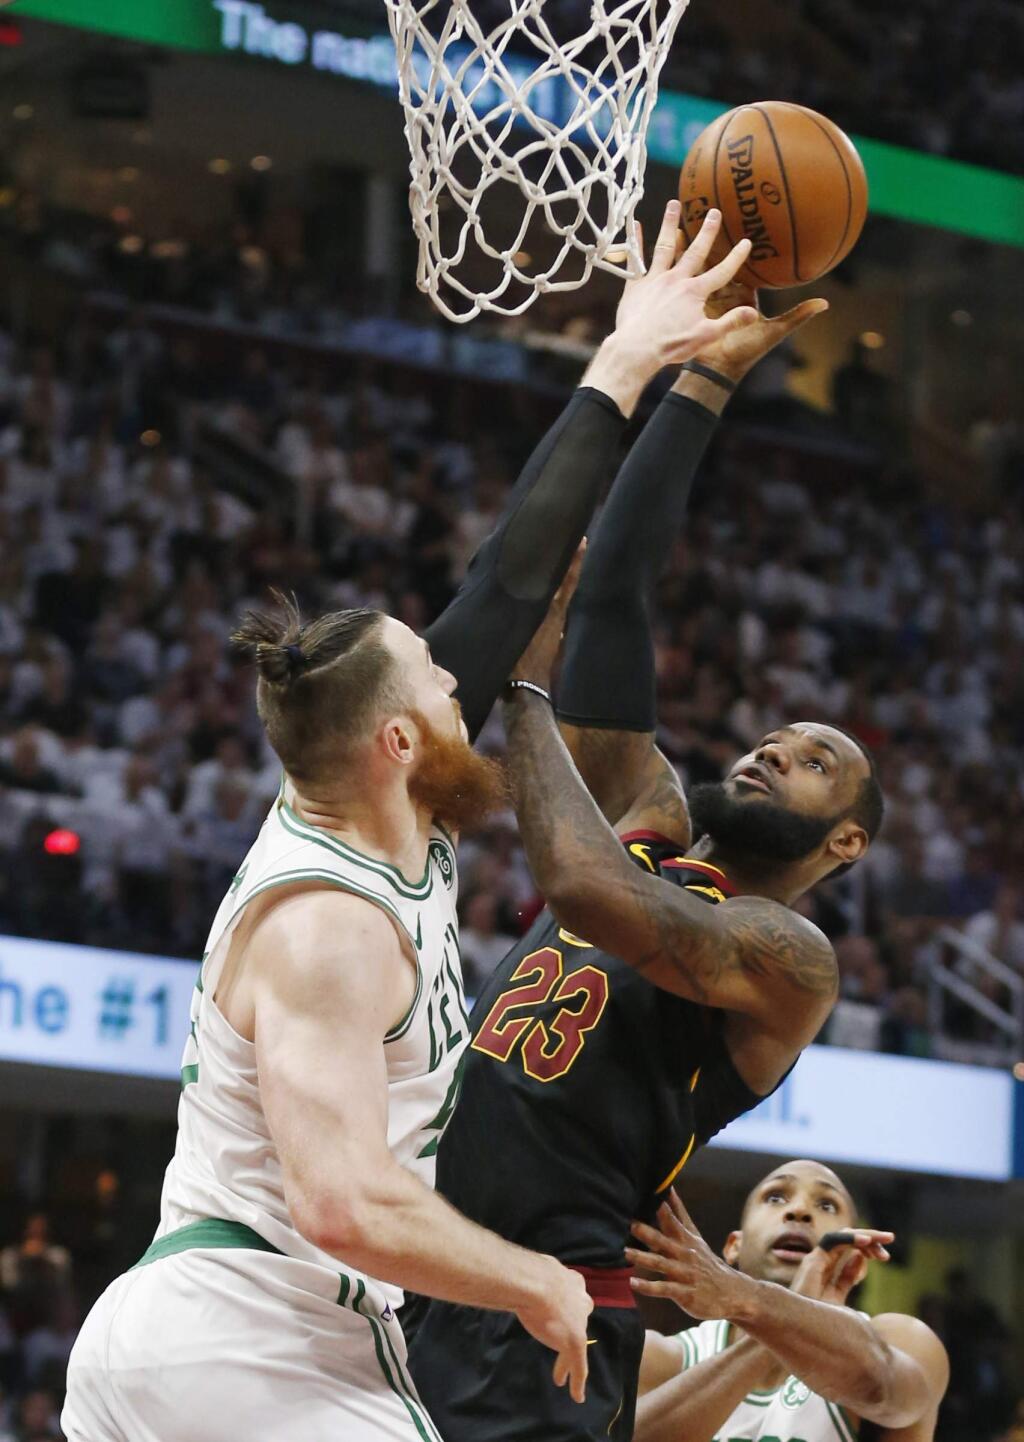 Cleveland Cavaliers' LeBron James, right, drives to the basket against Boston Celtics' Aron Baynes (46) during the first half of Game 6 of the NBA basketball Eastern Conference finals Friday, May 25, 2018, in Cleveland. (AP Photo/Ron Schwane)